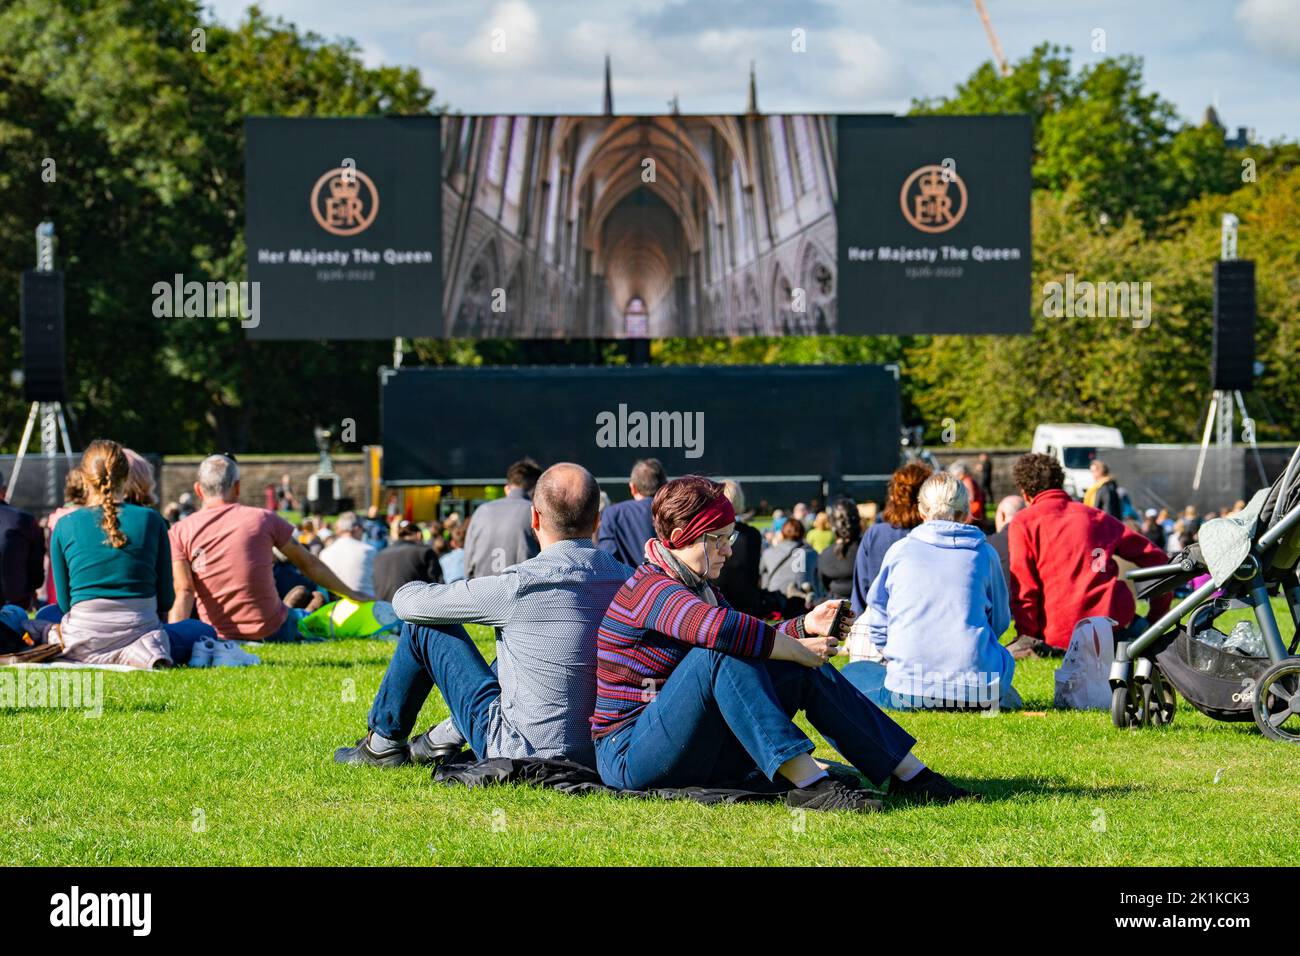 Edinburgh, Scotland, UK. 19th September 2022. Members of the public gather in Holyrood Park to watch live screening on big screen of funeral of Queen Elizabeth II from Westminster Abbey.   Iain Masterton/Alamy Live News Stock Photo